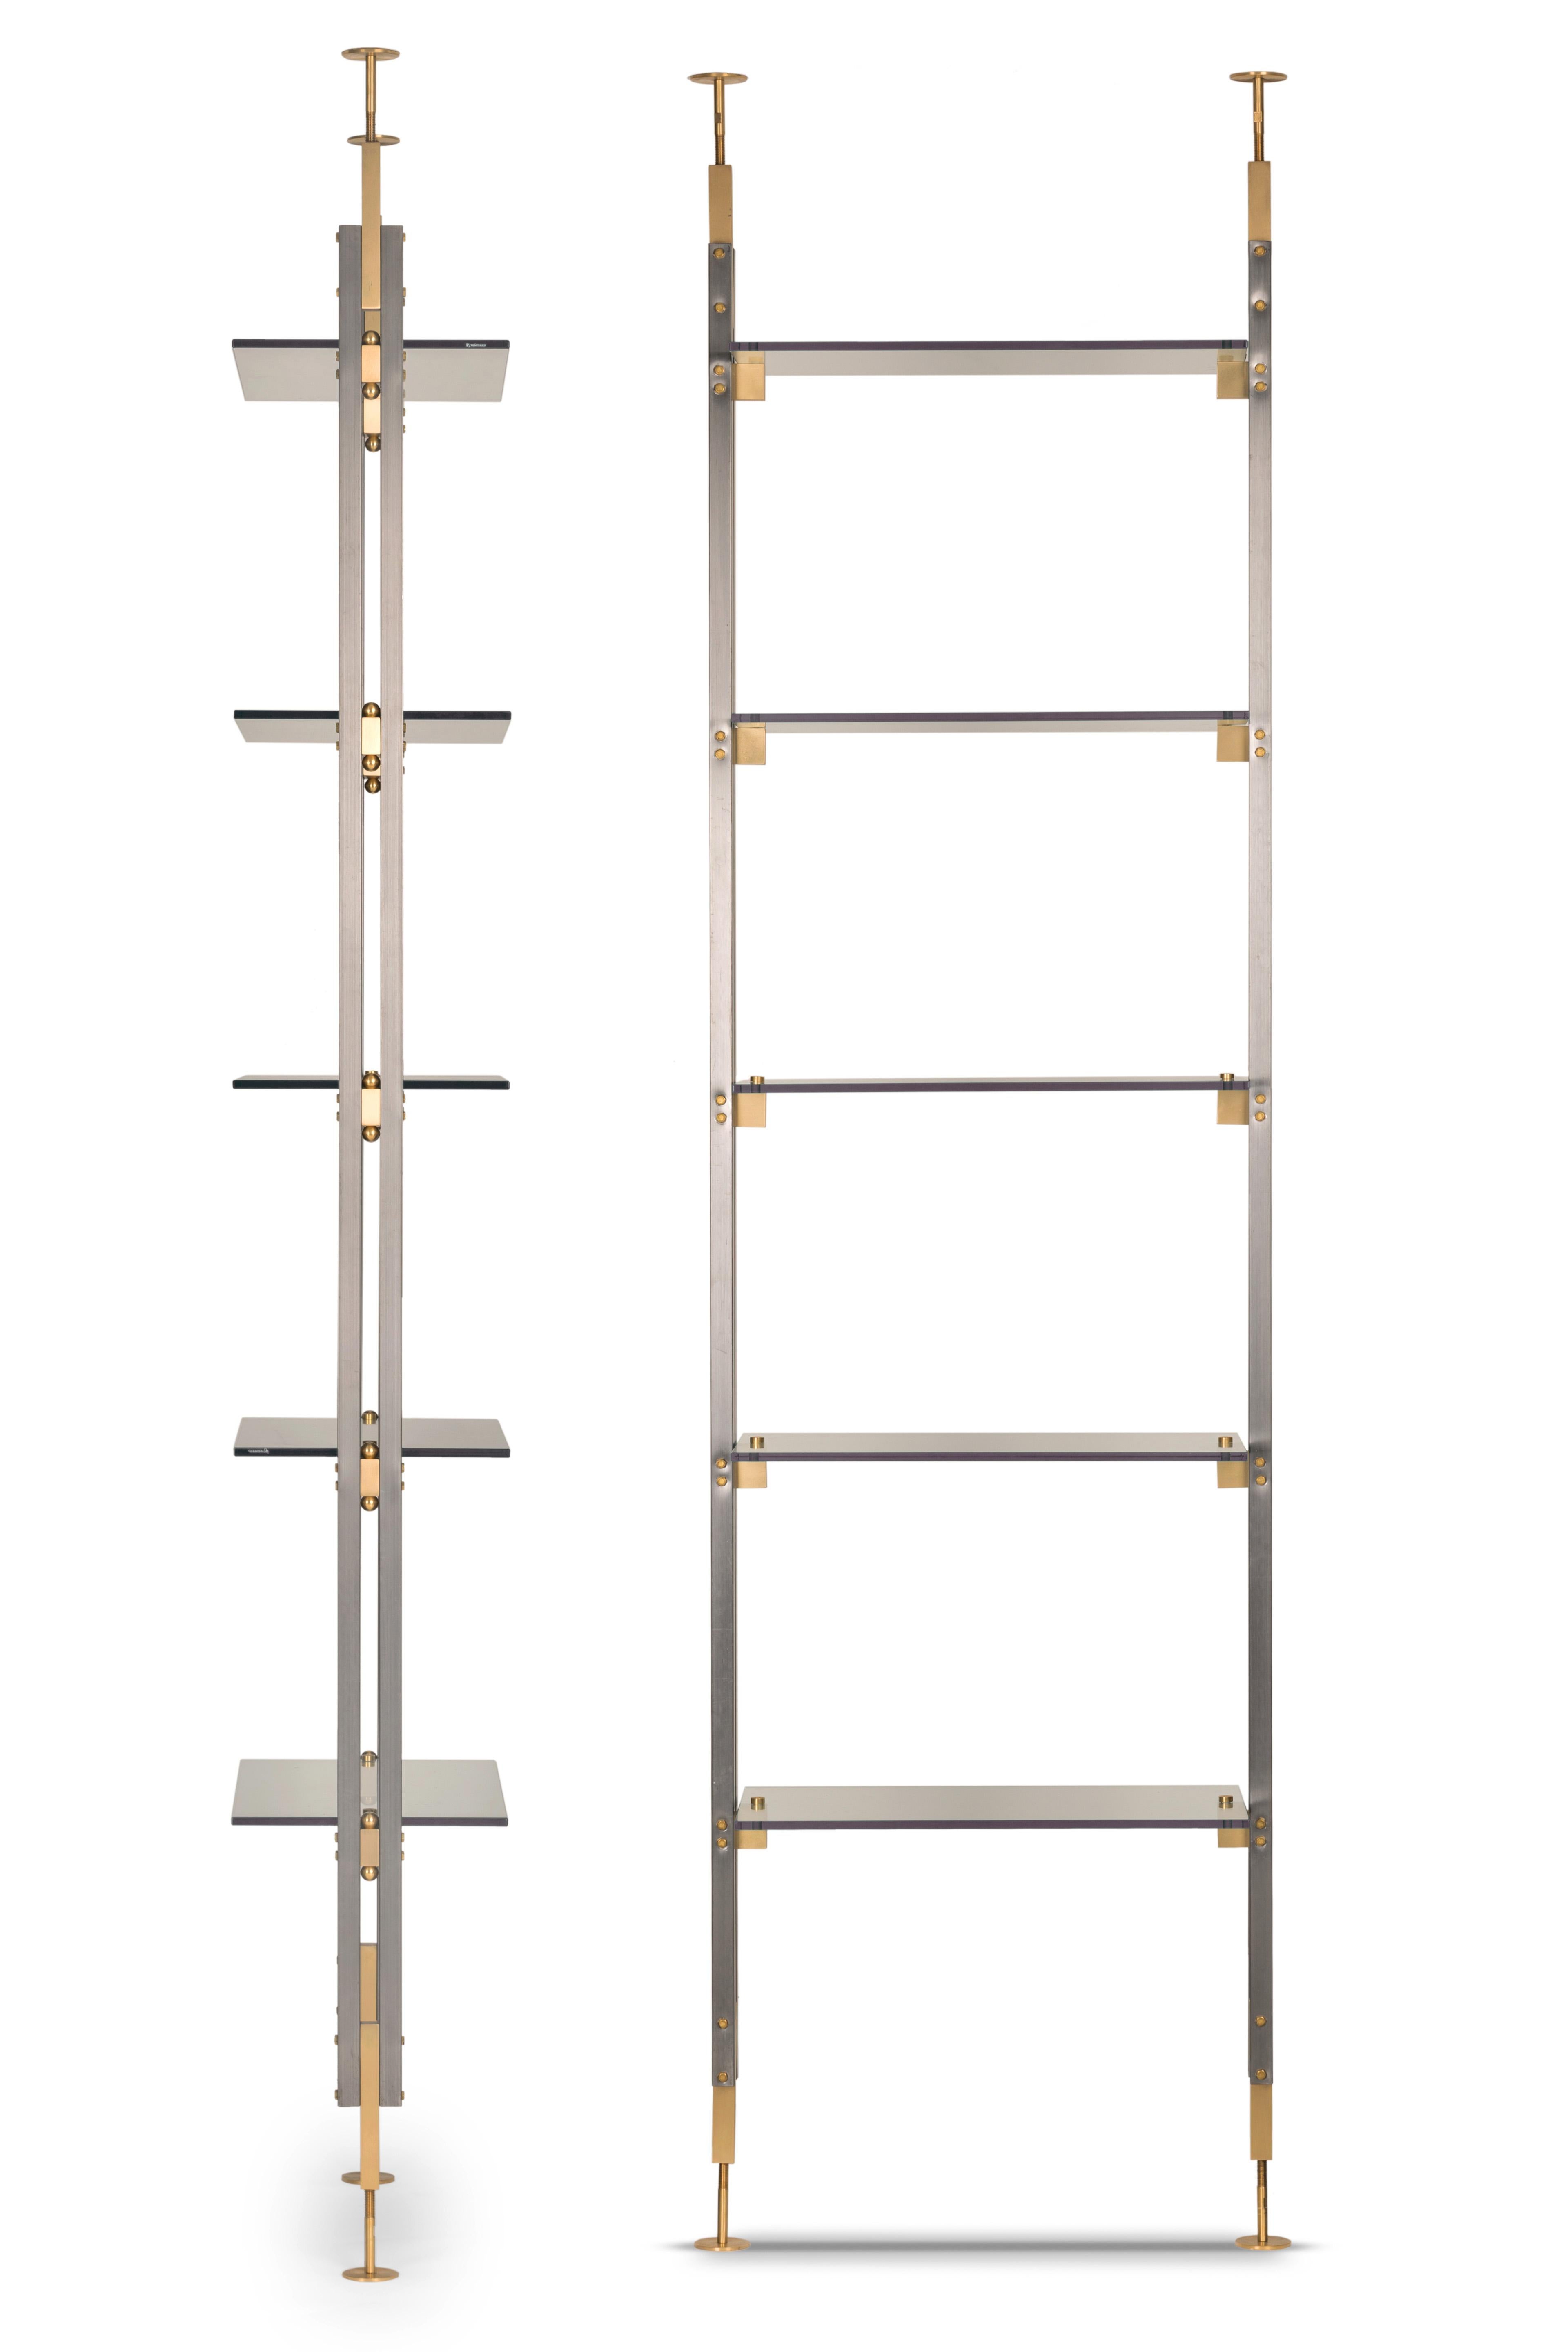 Marianne bookshelf by Mingardo
Dimensions: D62 x W30 x H240 cm 
Materials: Matte nickel structure, tempered glass shelves. Natural brass details with spheres.
Weight: 60 kg
Also Available in different finishes and dimensions.

A thin, elegant,